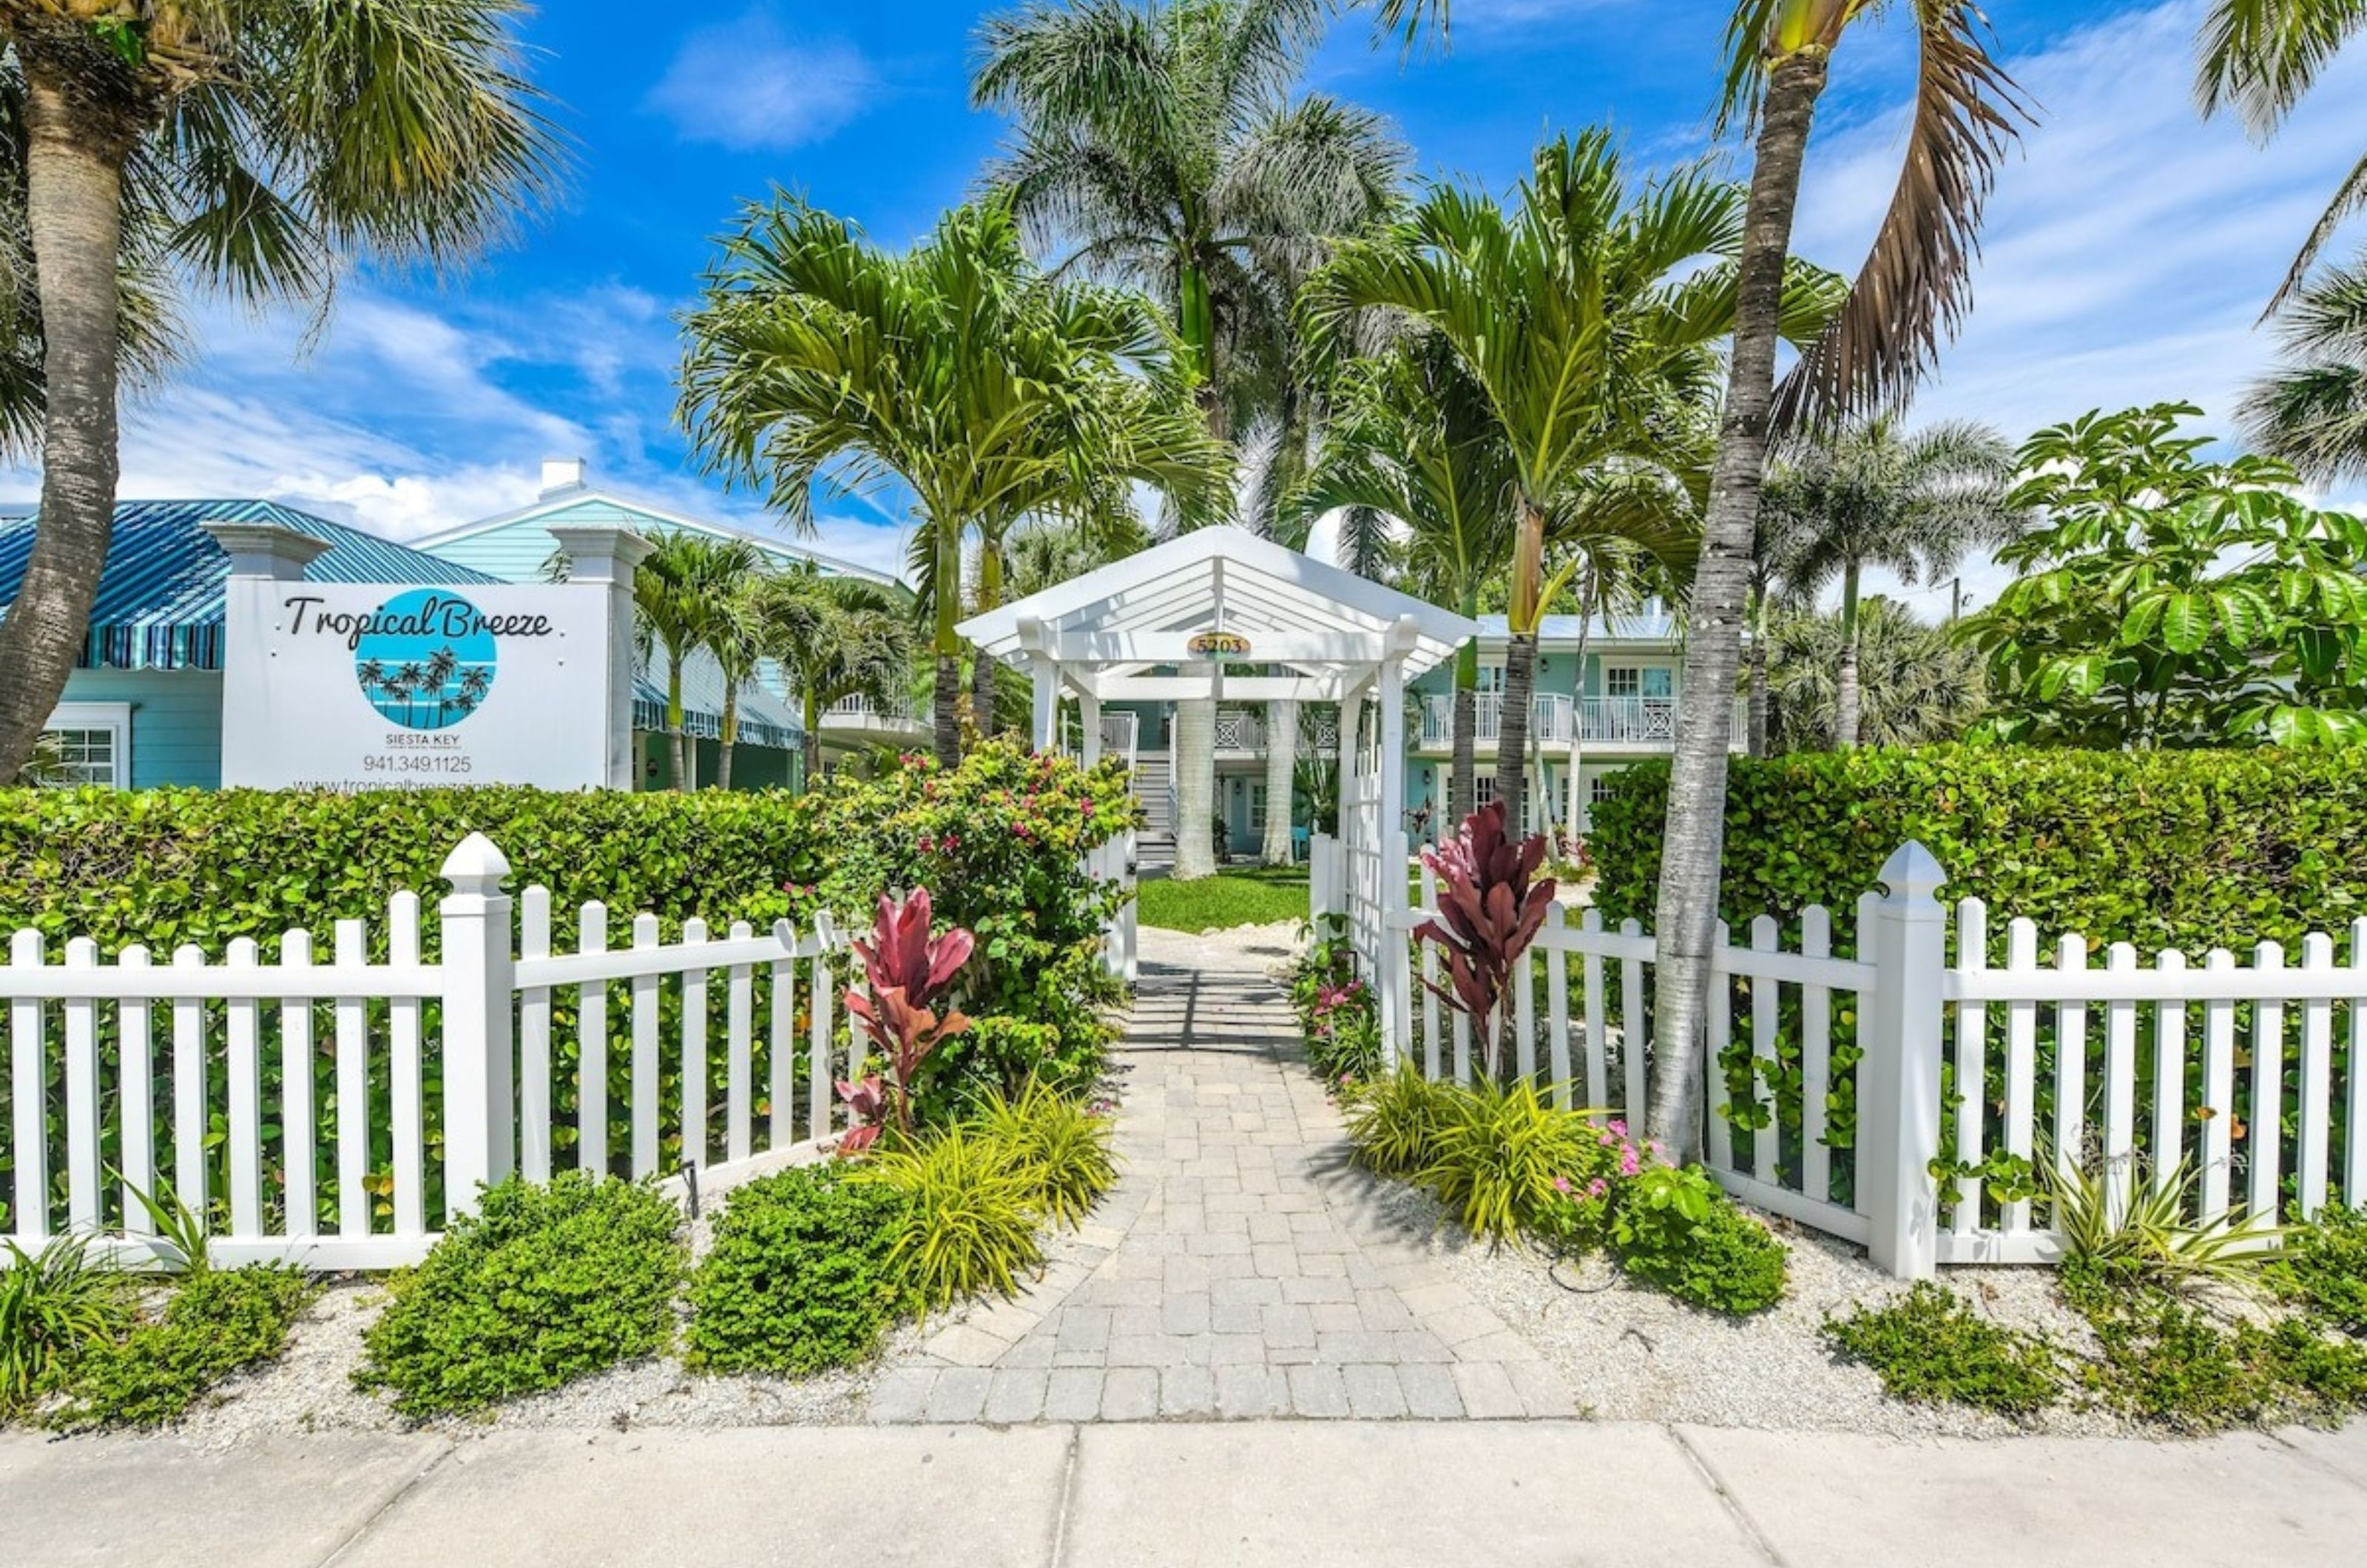 The entrance to Tropical Breeze Resort in Siesta Key Florida 